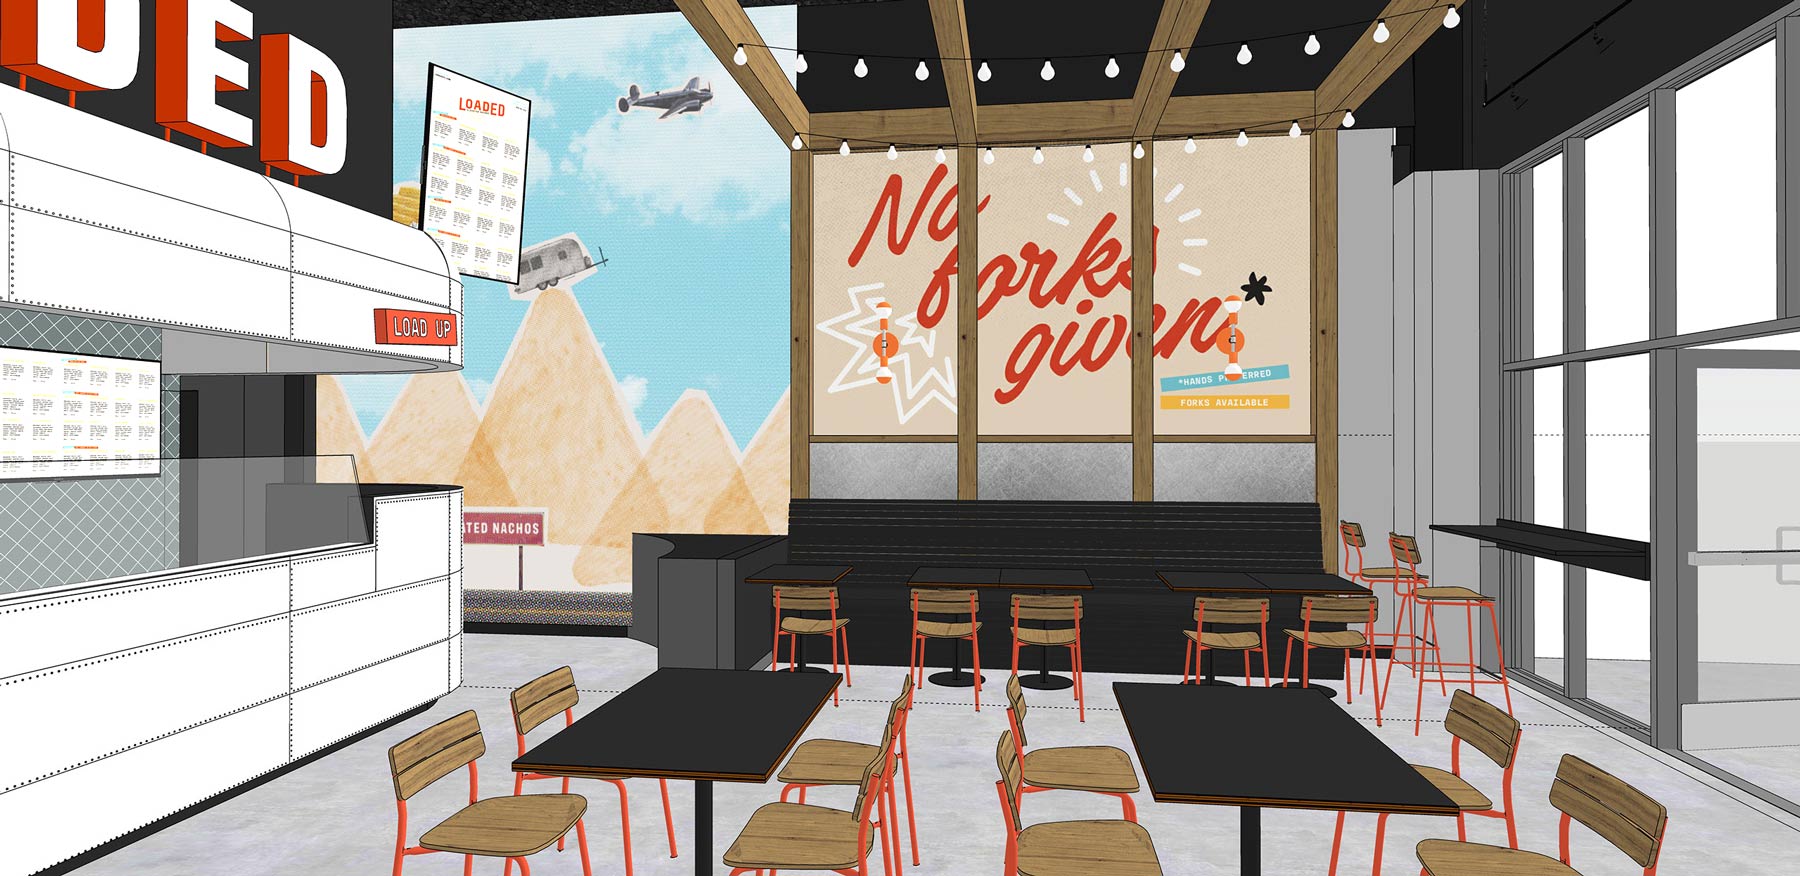 A rendering of the interiors of Loaded showing the brand identity as environmental elements including the "No forks given" and Chip Mountain wall graphic